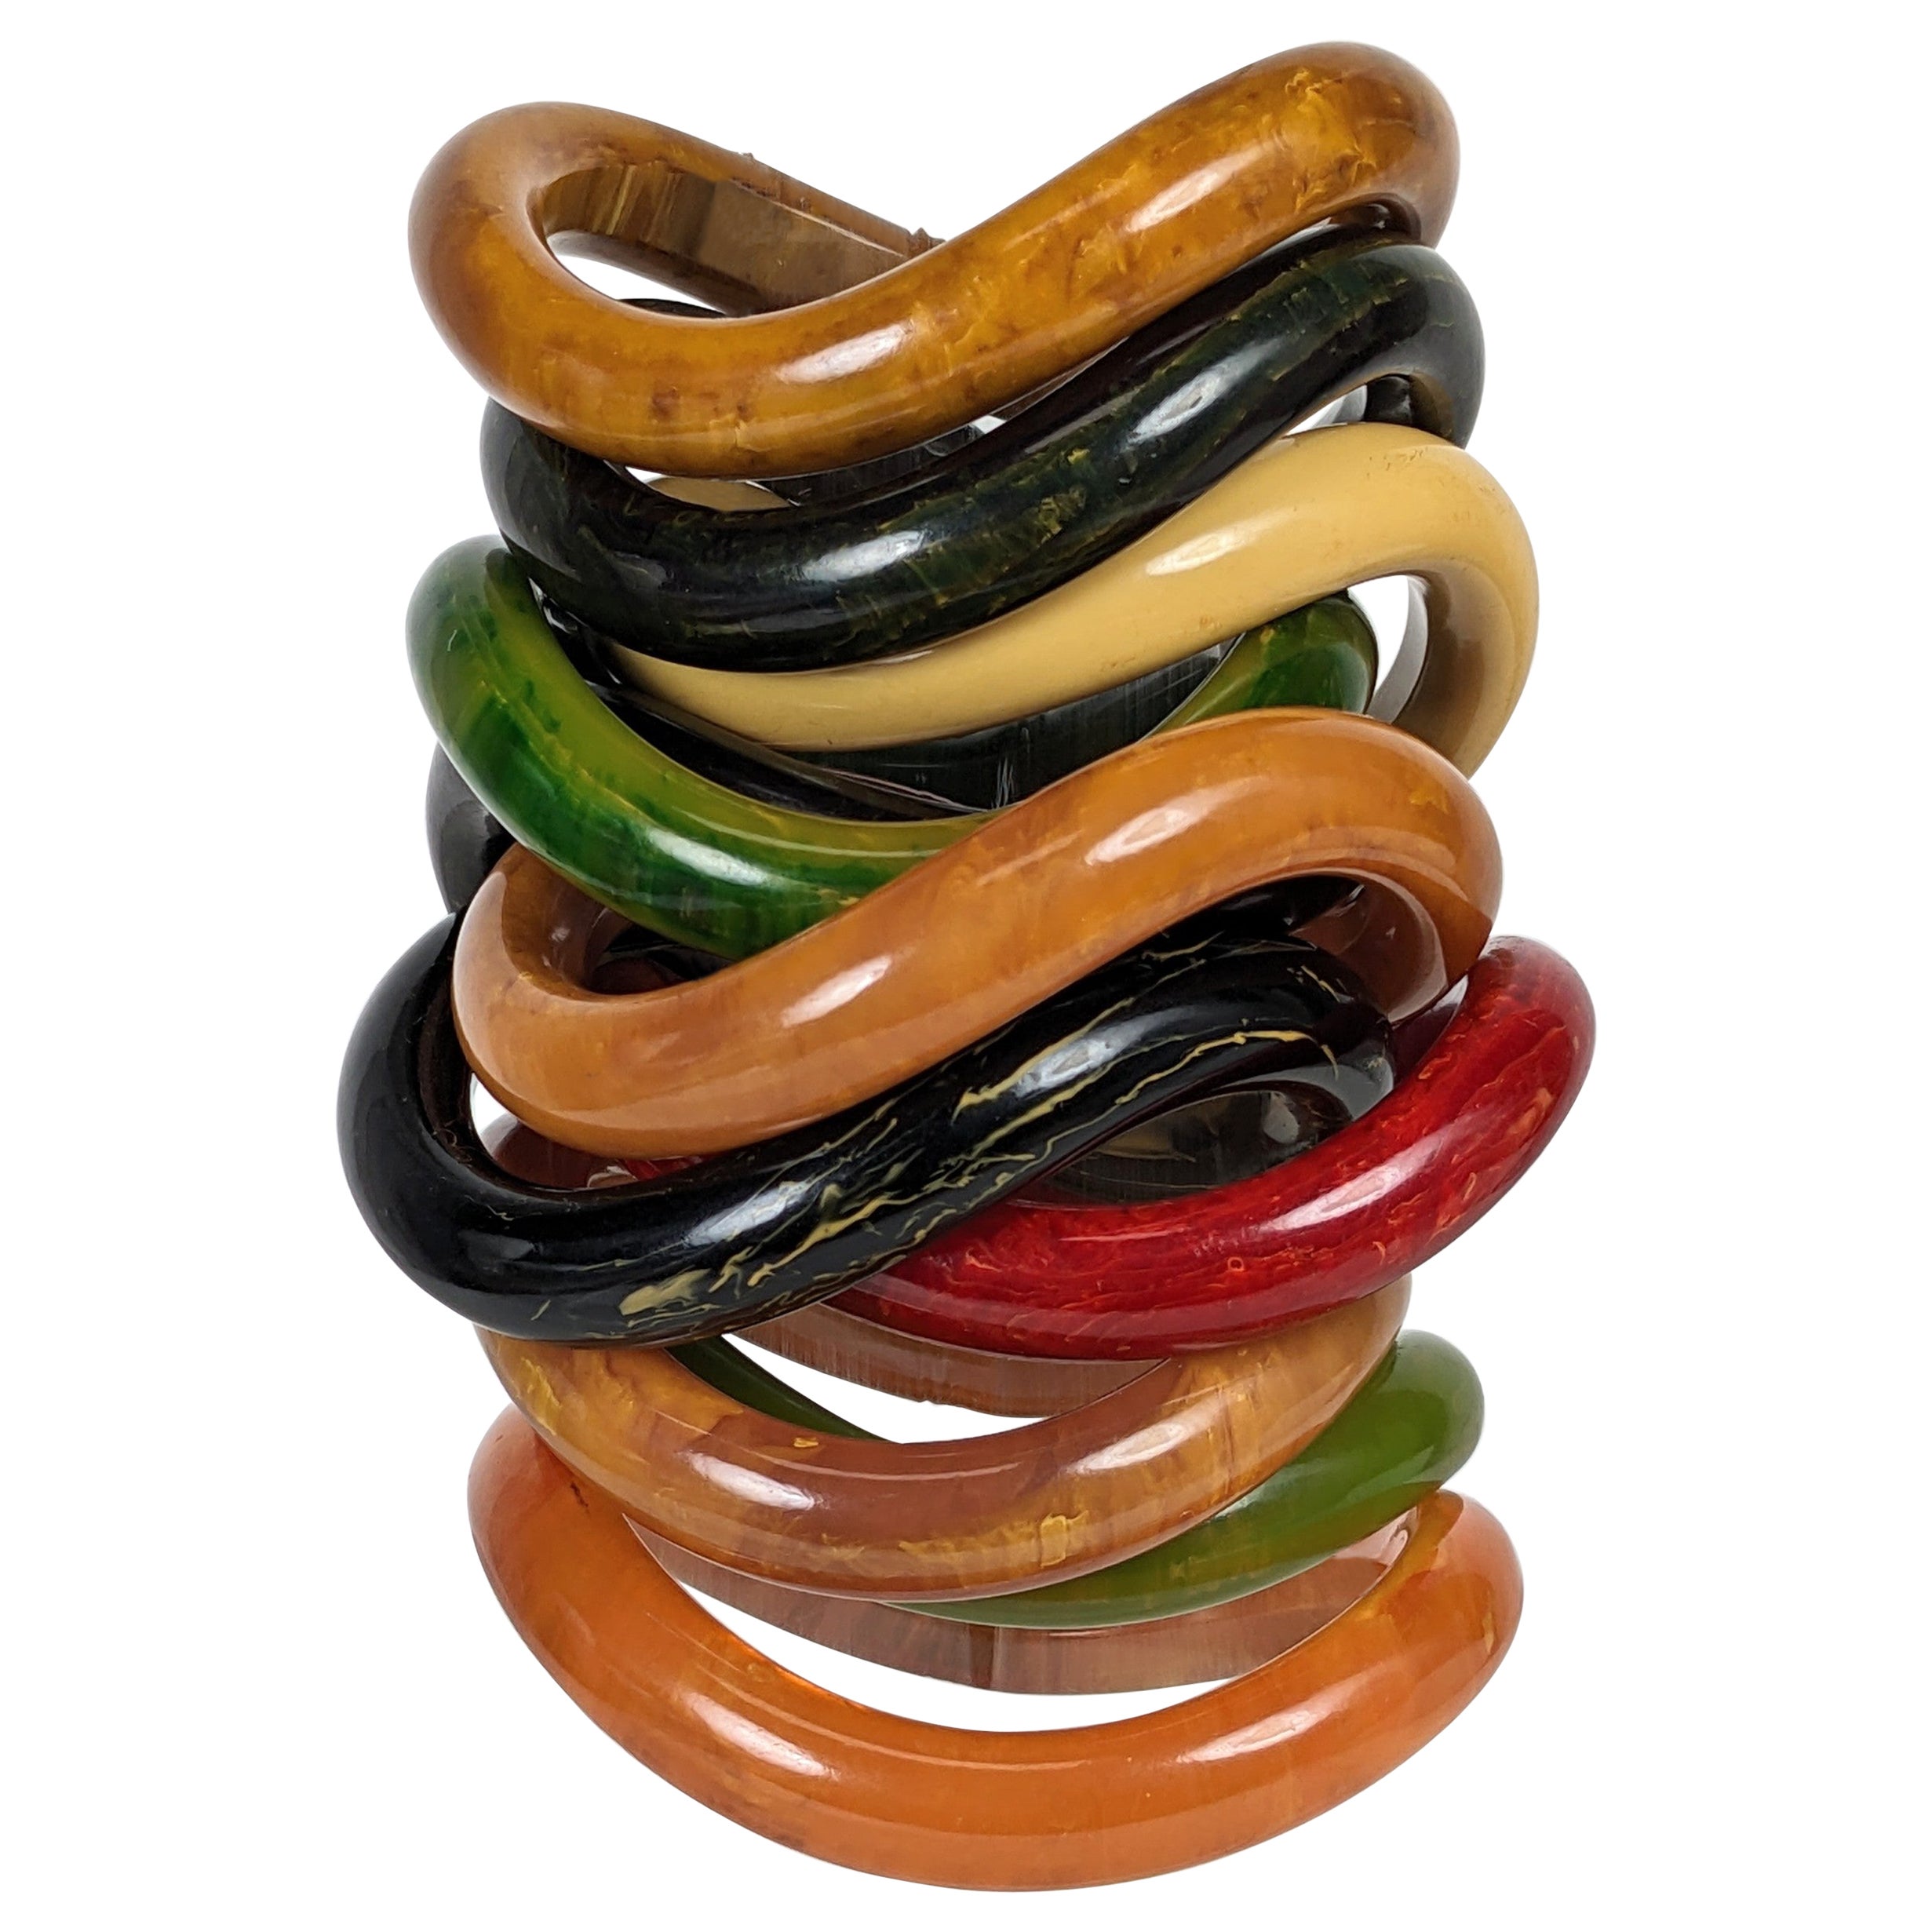 Collection of End of Day Bakelite Squiggle Bracelets